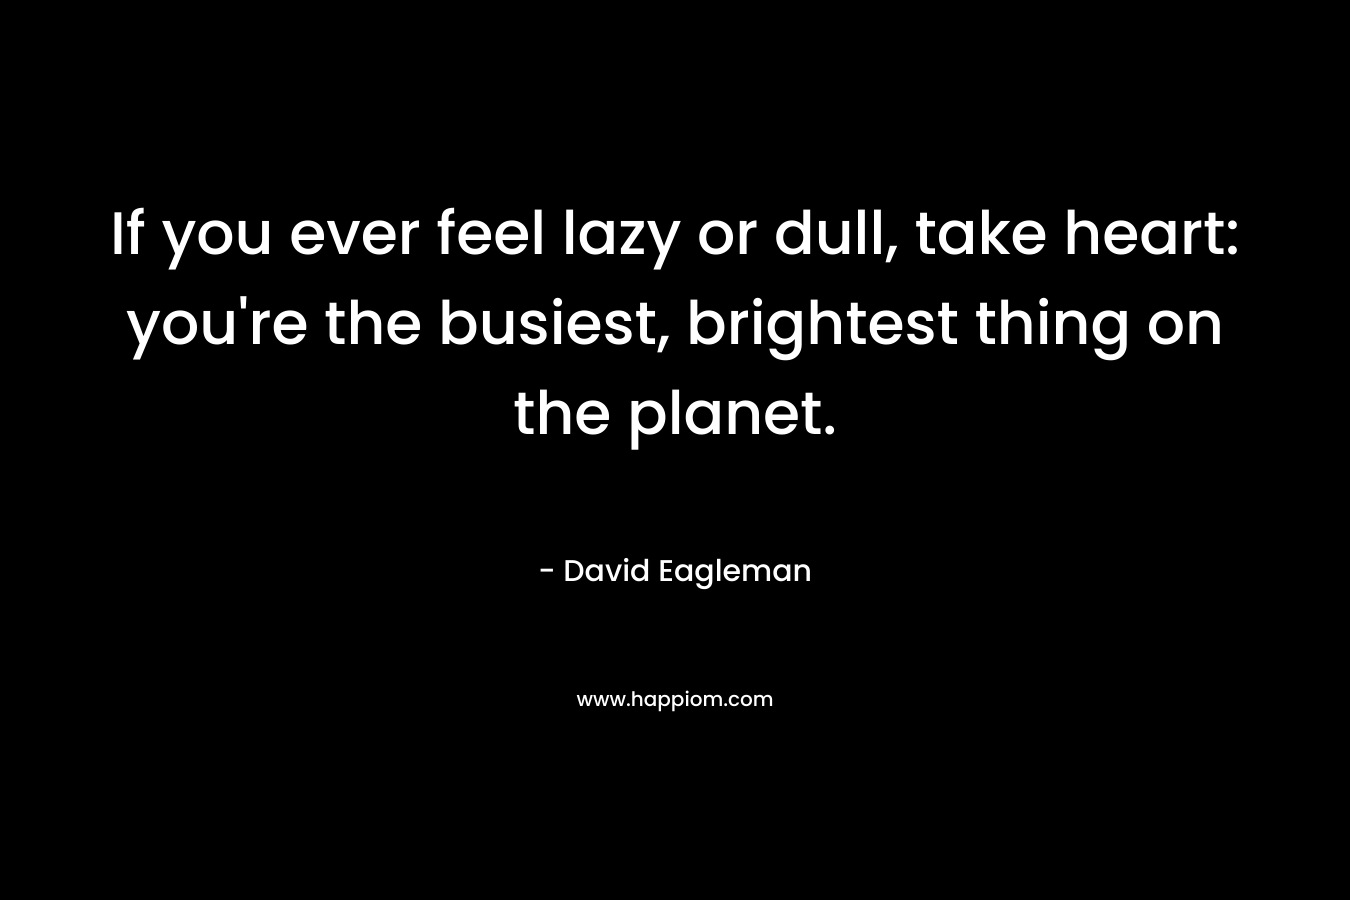 If you ever feel lazy or dull, take heart: you're the busiest, brightest thing on the planet.